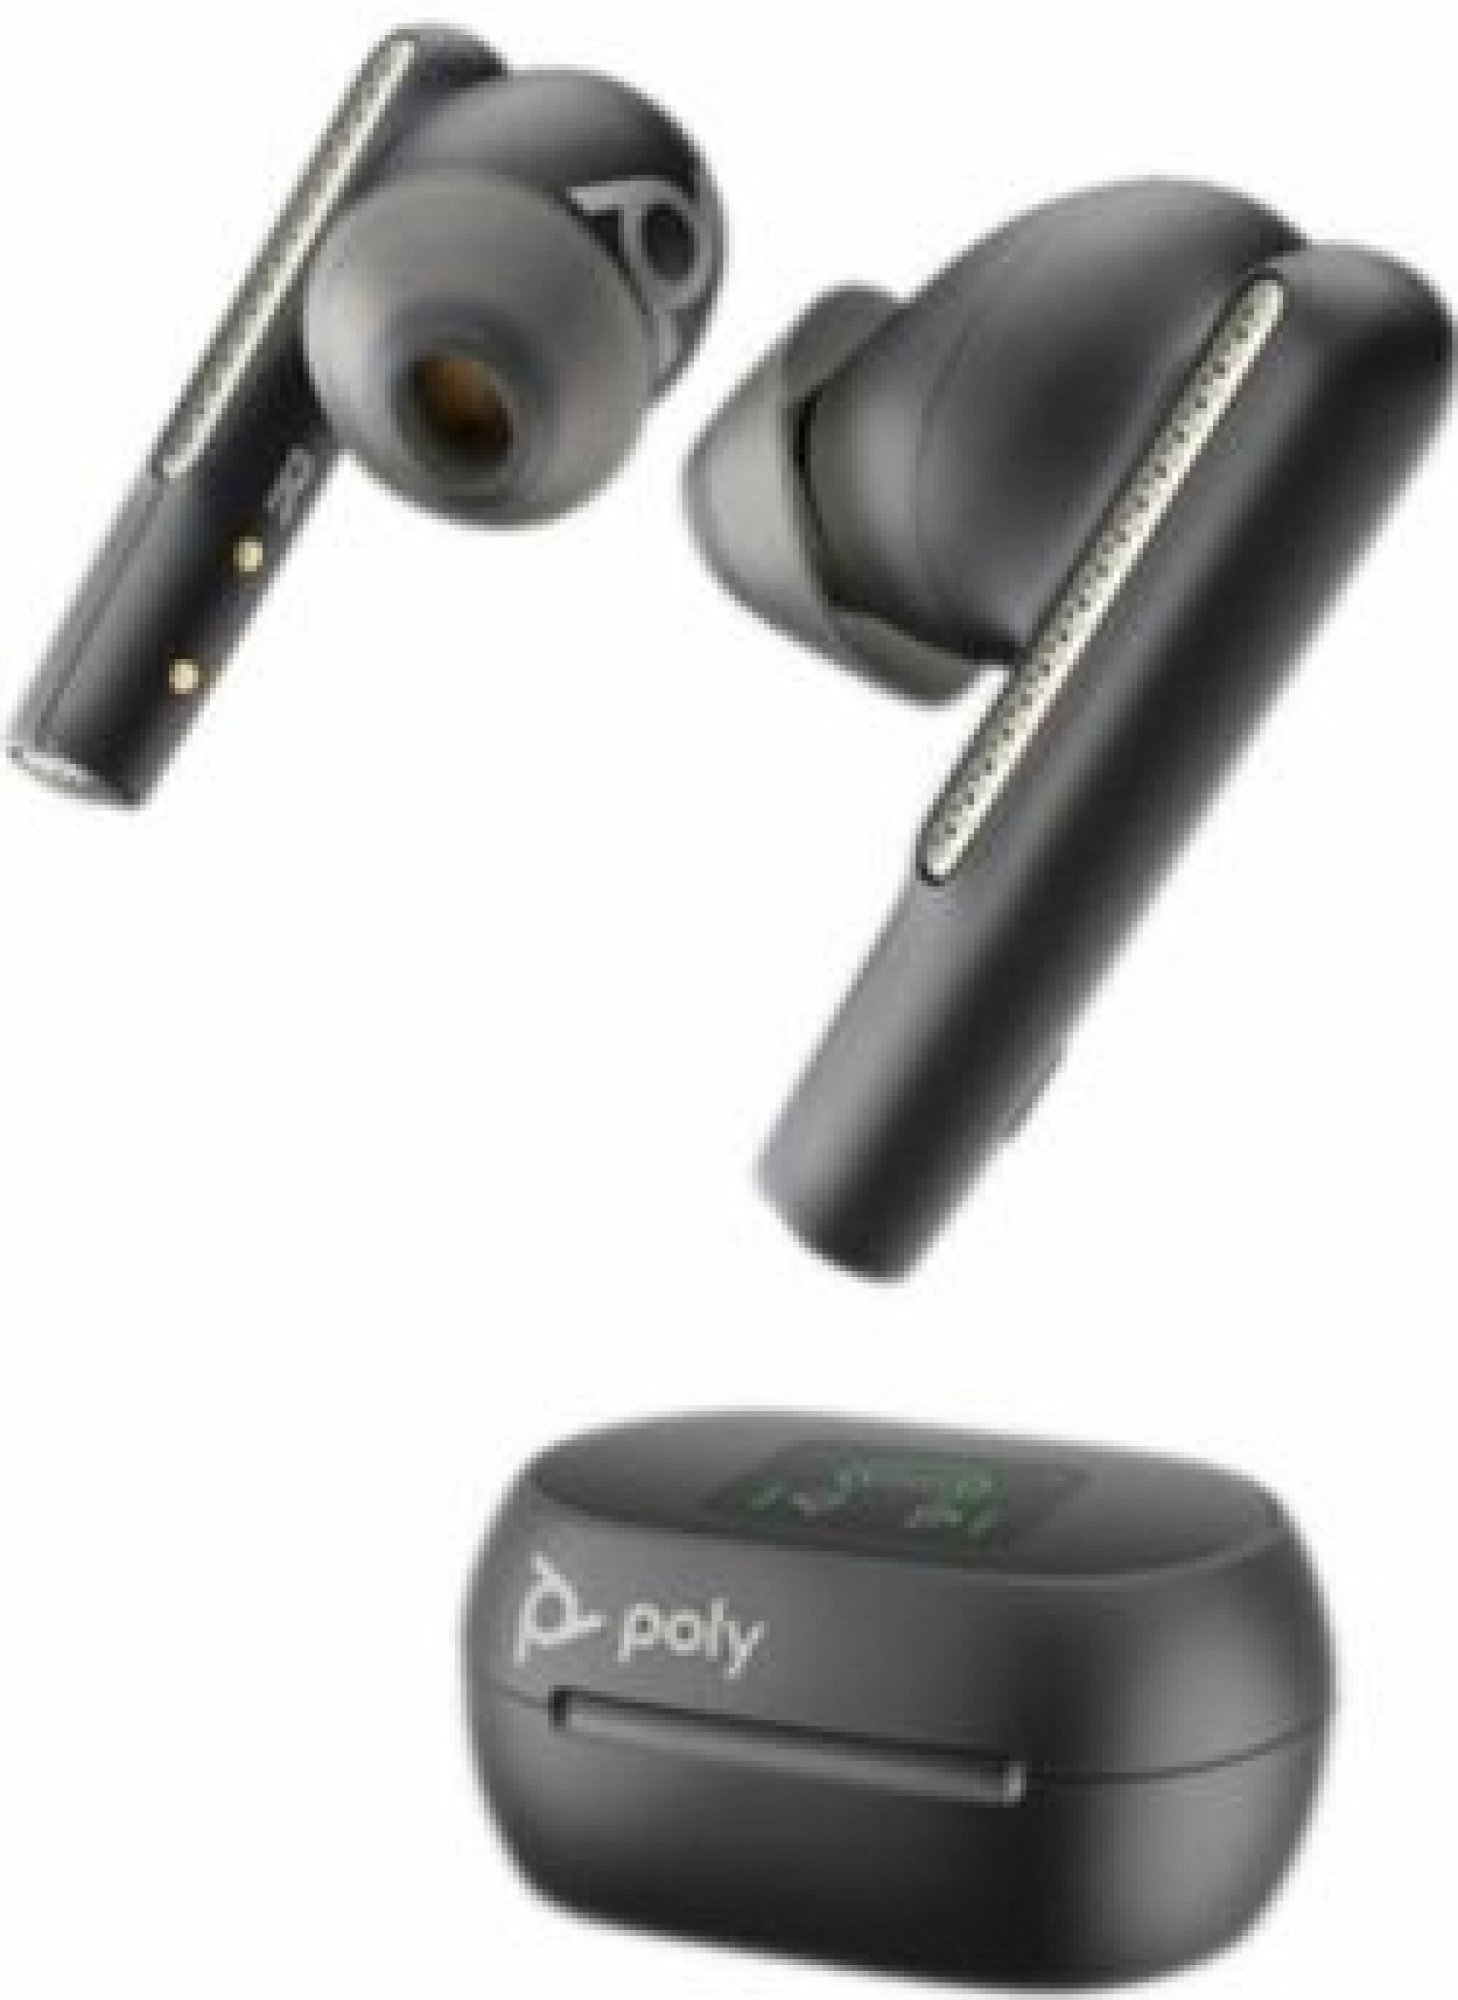 Poly Voyager Free 60+ UC